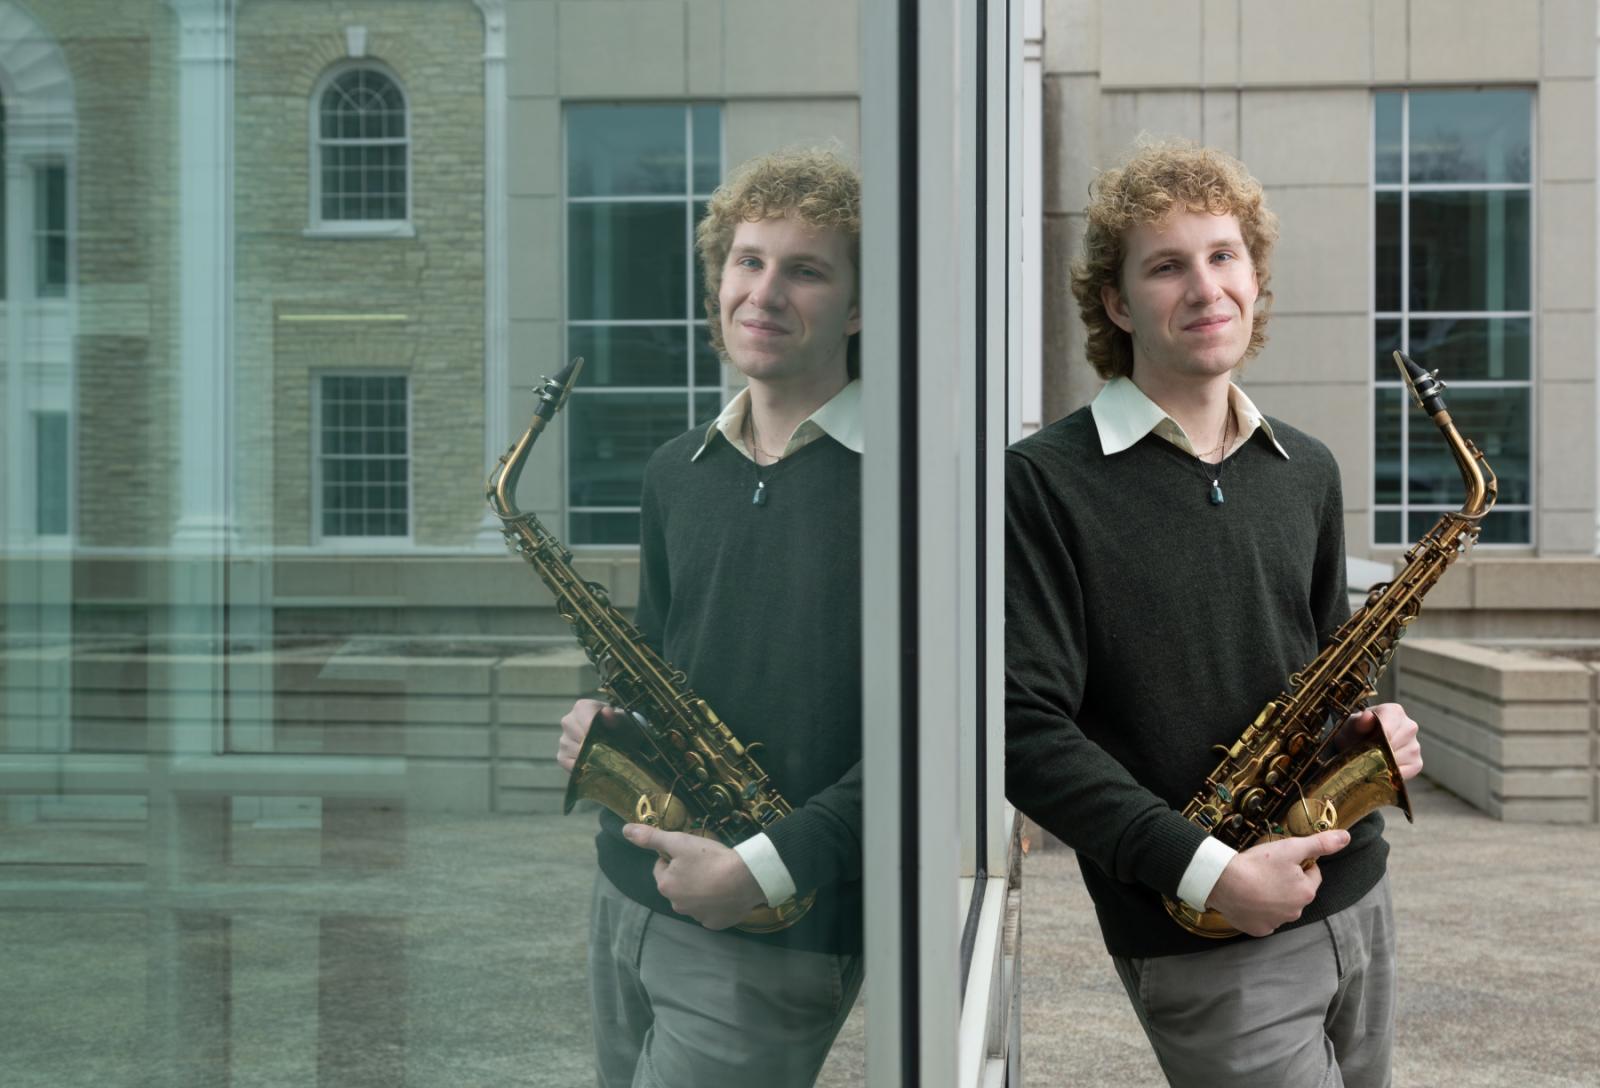 Owen Brady, holding his saxophone, is reflected in the window of Shattuck Hall.